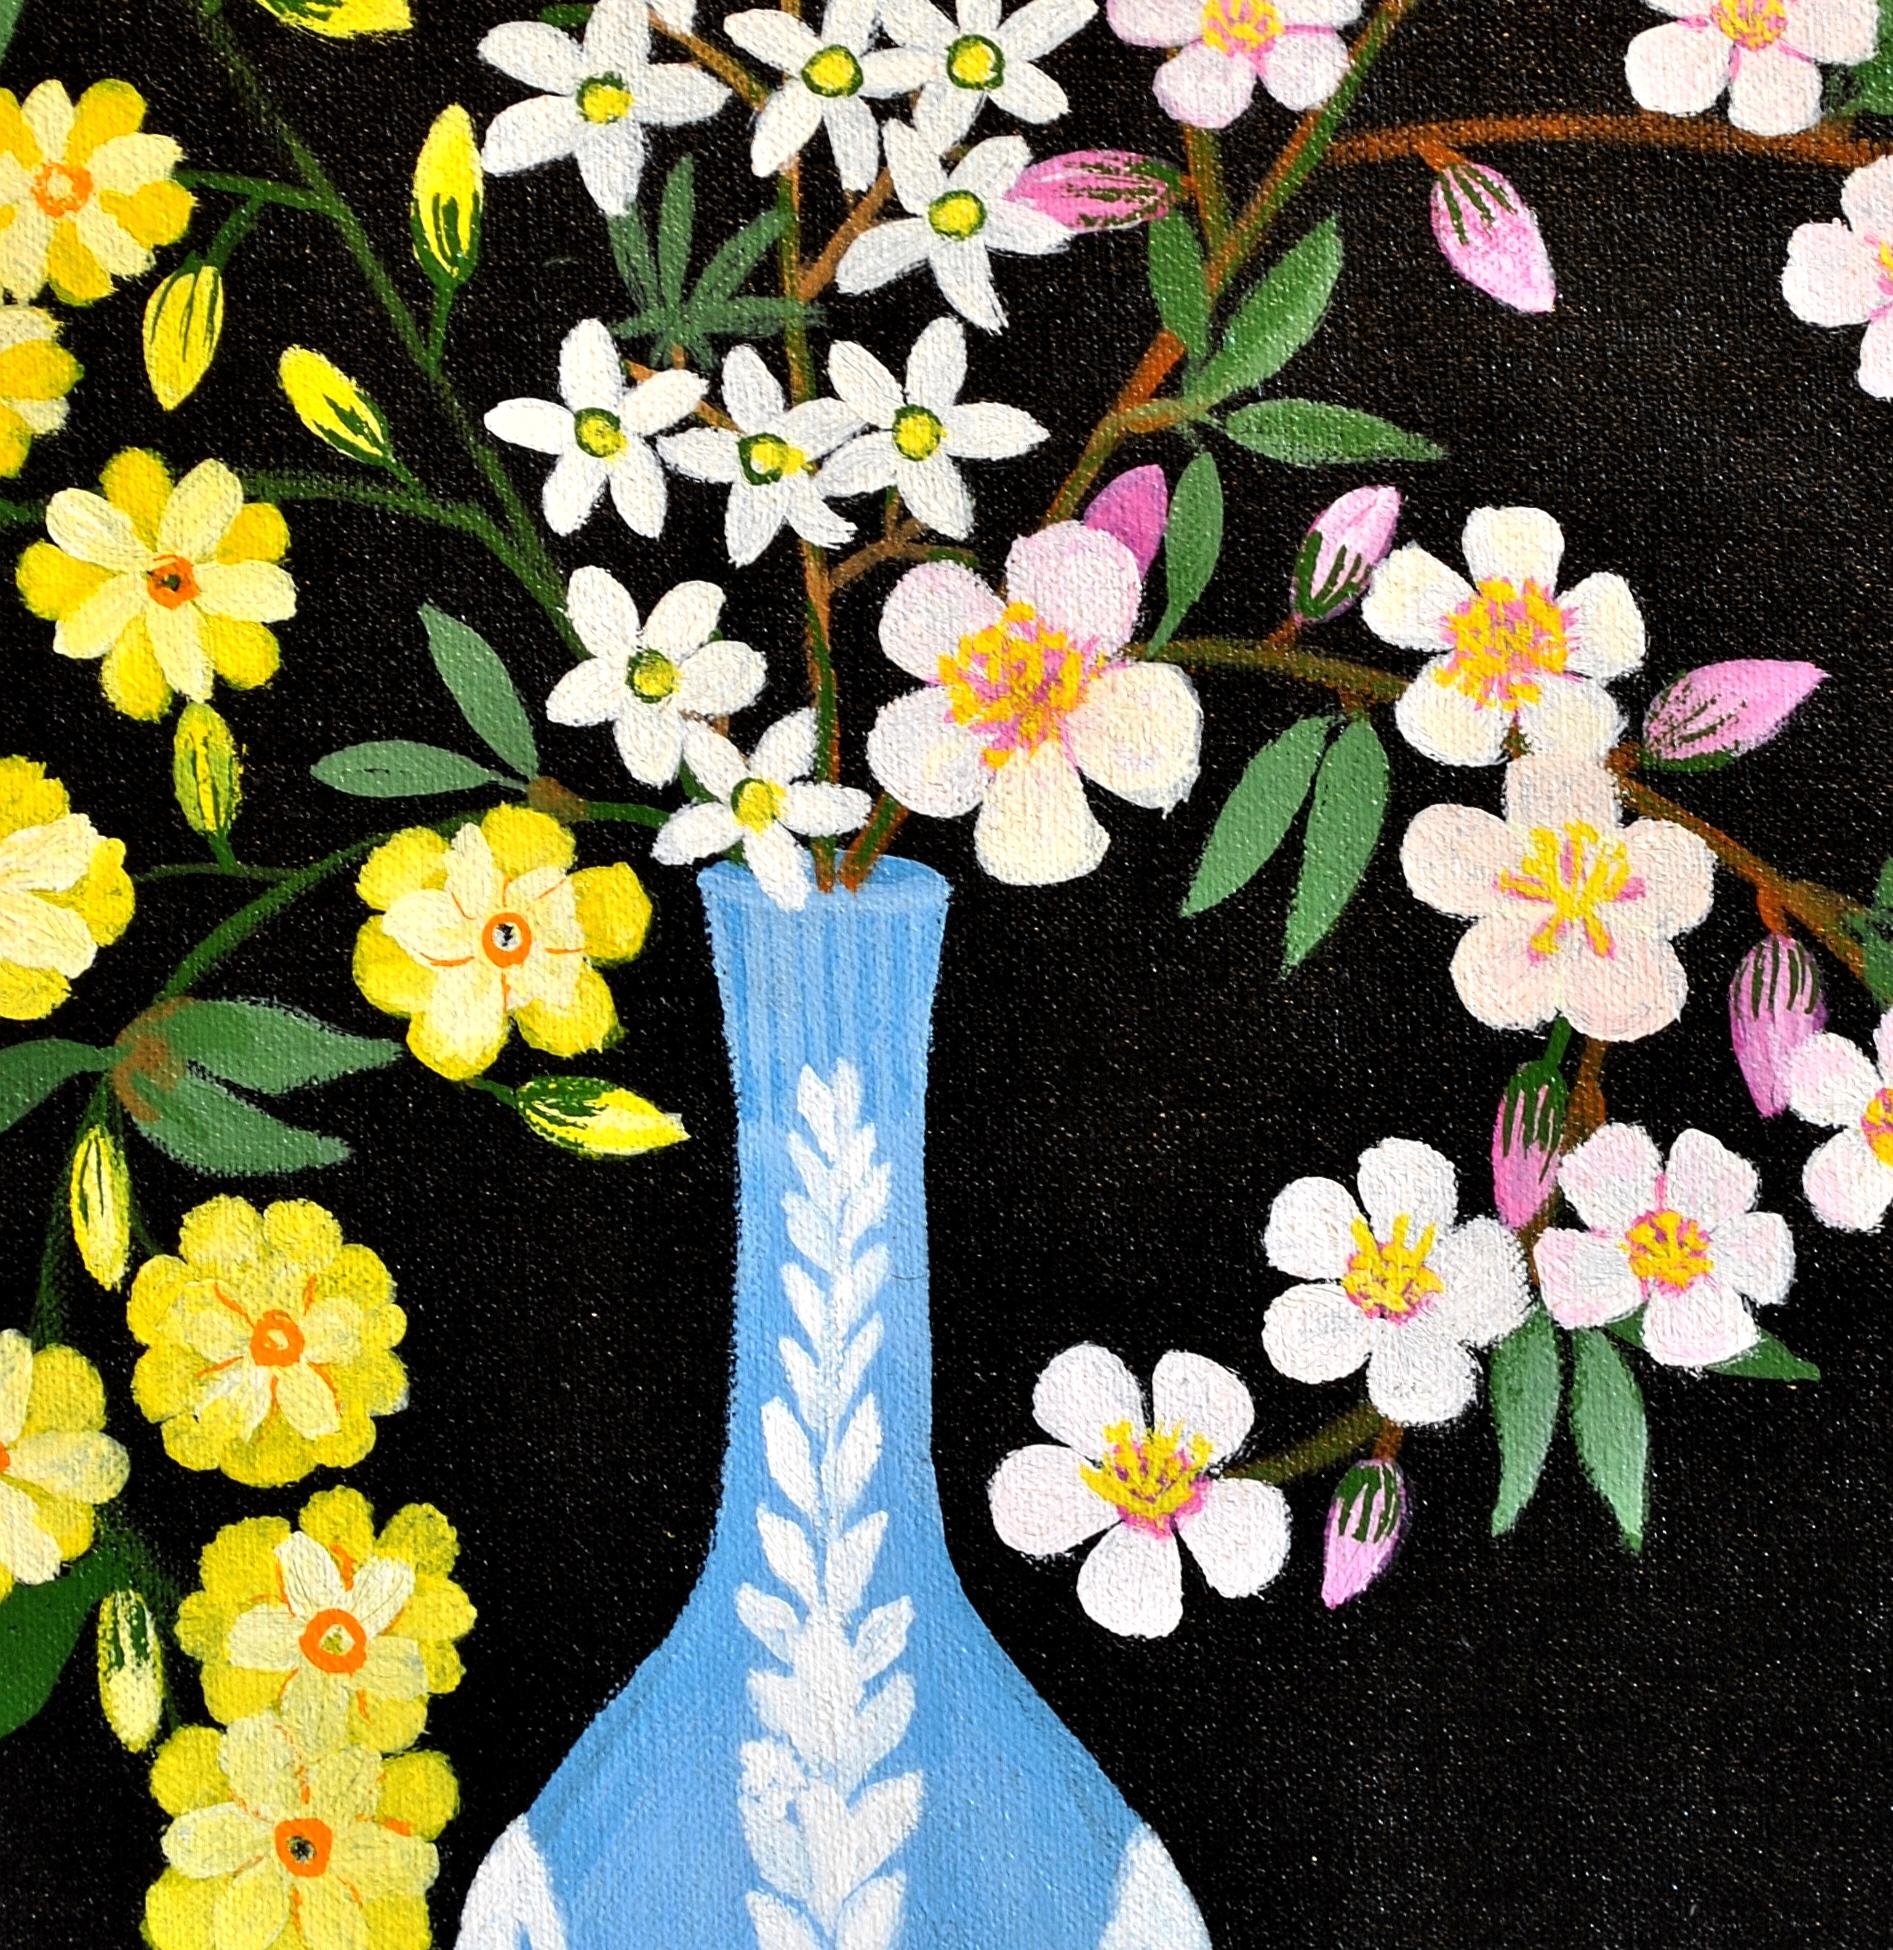 A beautiful naïf oil on canvas still life depicting spring blossom in a wedgwood vase by Thraki Rossidou Jones of Cyprus. Signed and dated 1985 lower right above the rug.

Thraki Rossidou Jones started painting in 1980. She developed her very own